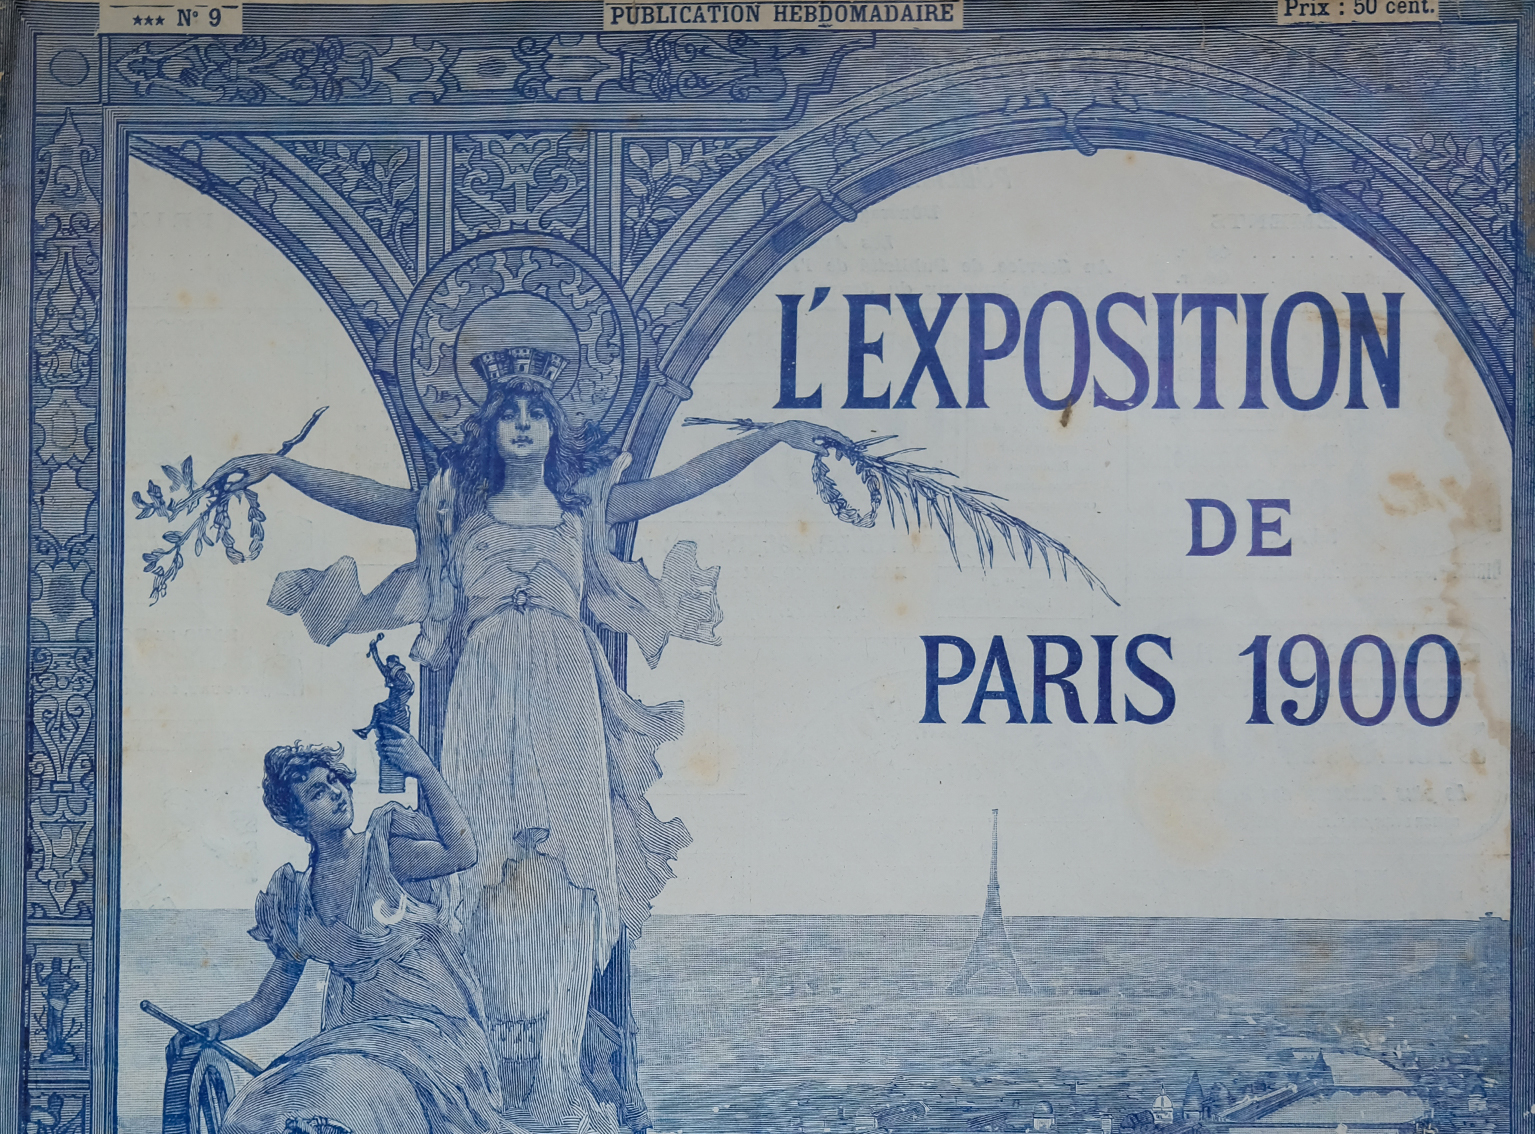 Reconsitution-history-exhibition-universal-1900